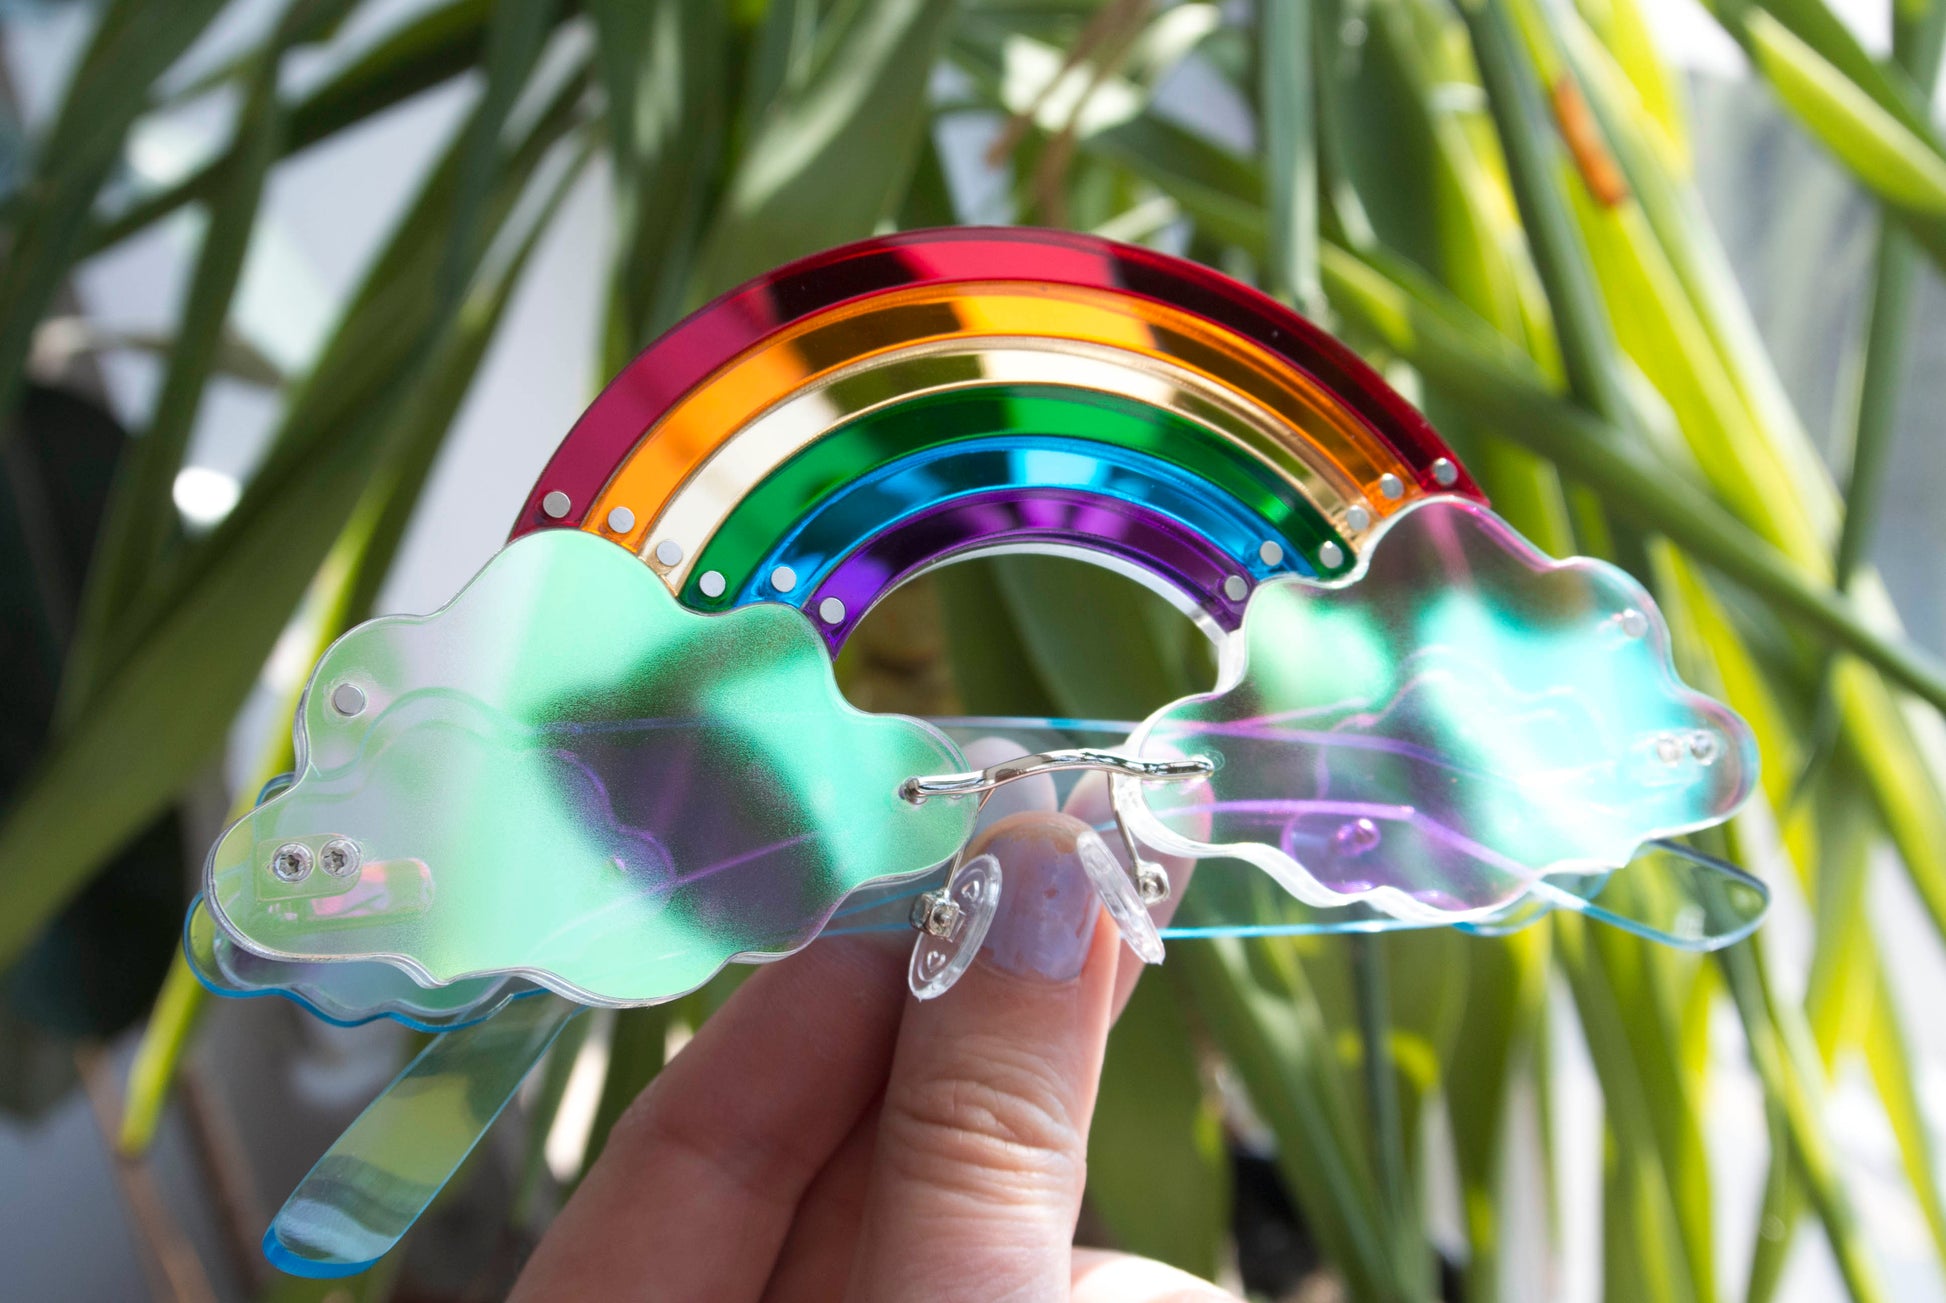 Multi layered bespoke glasses with rainbows and clouds by Anna Mulhearn